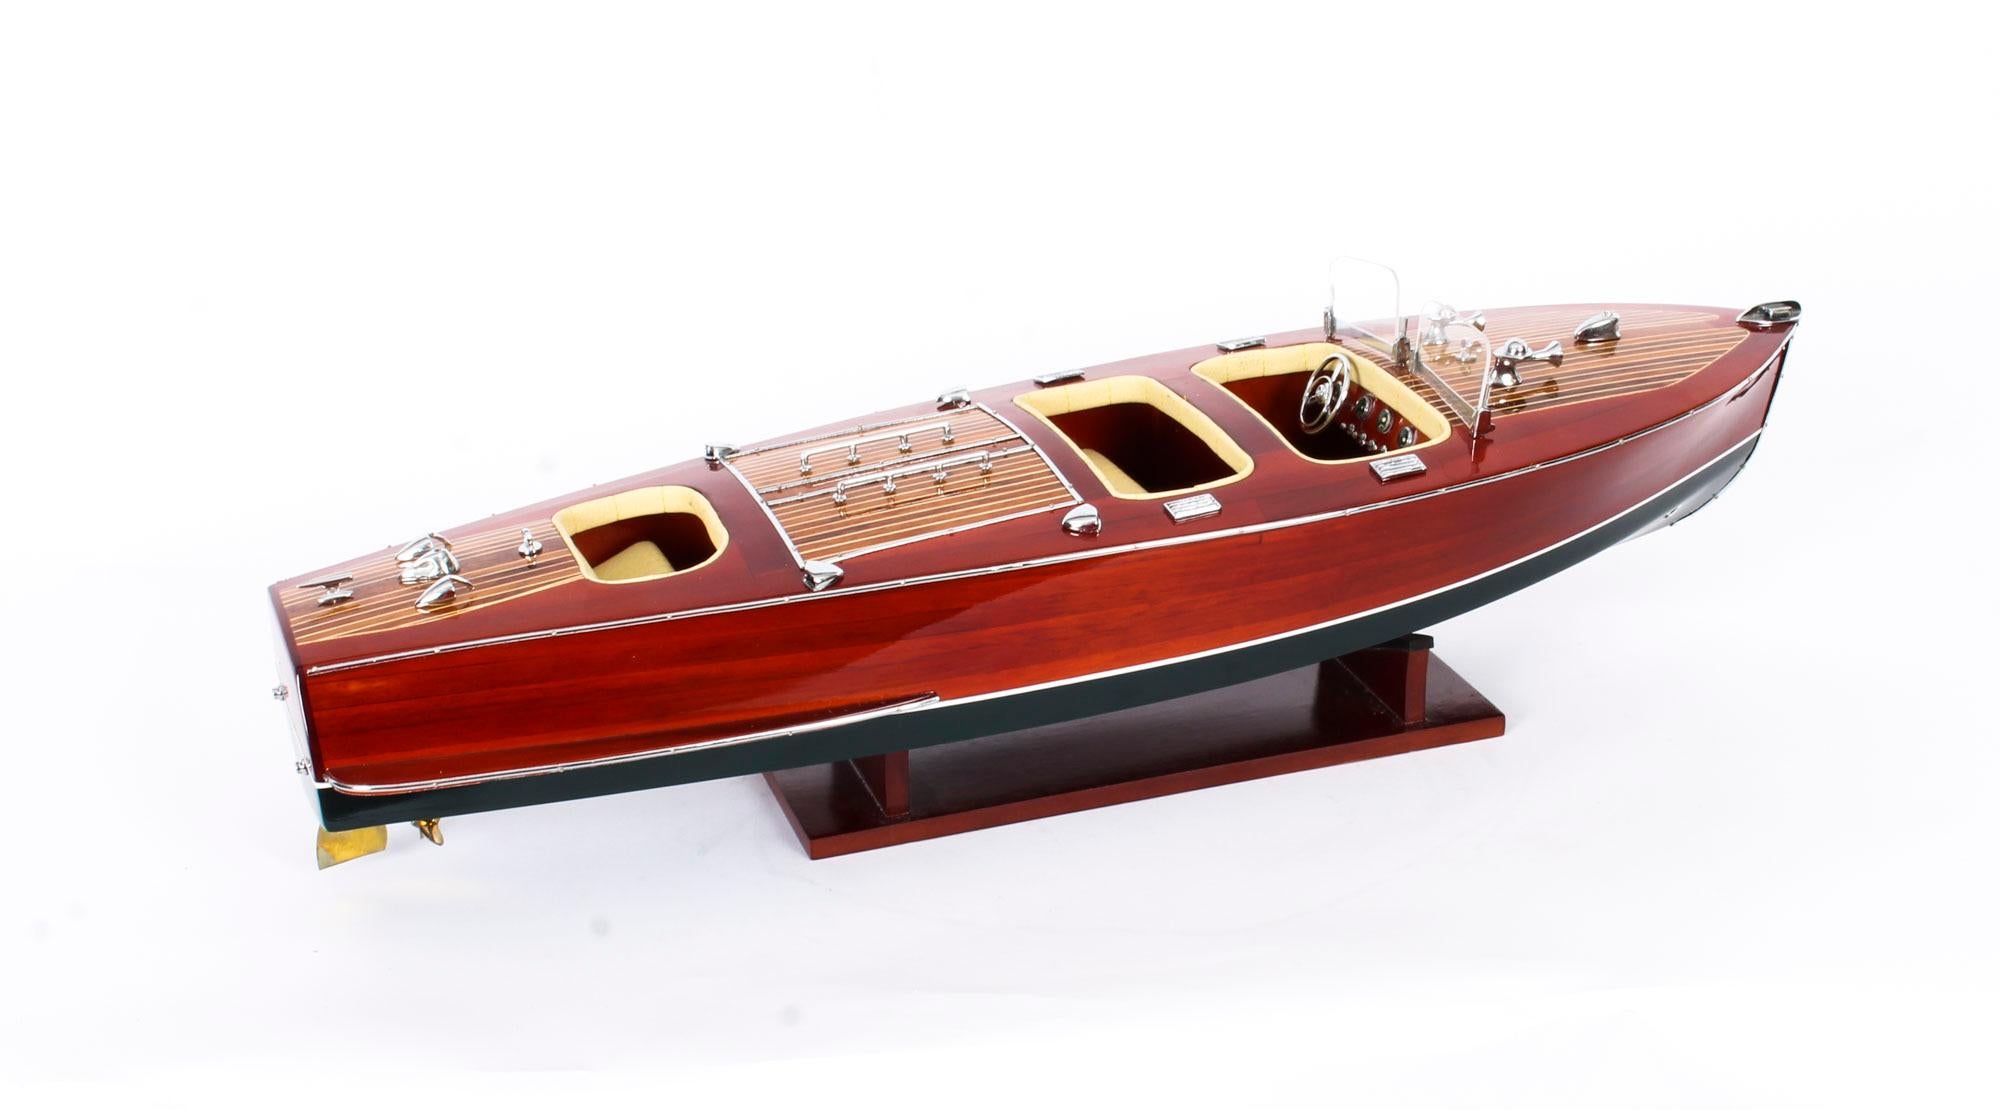 This is an exceptional hand built model of the “Riva Rivarama”, a luxury wooden launch built by the Italian yacht builder Riva, dating from the late 20th century.

This impressive speedboat is built to scale and mirrors the original model which